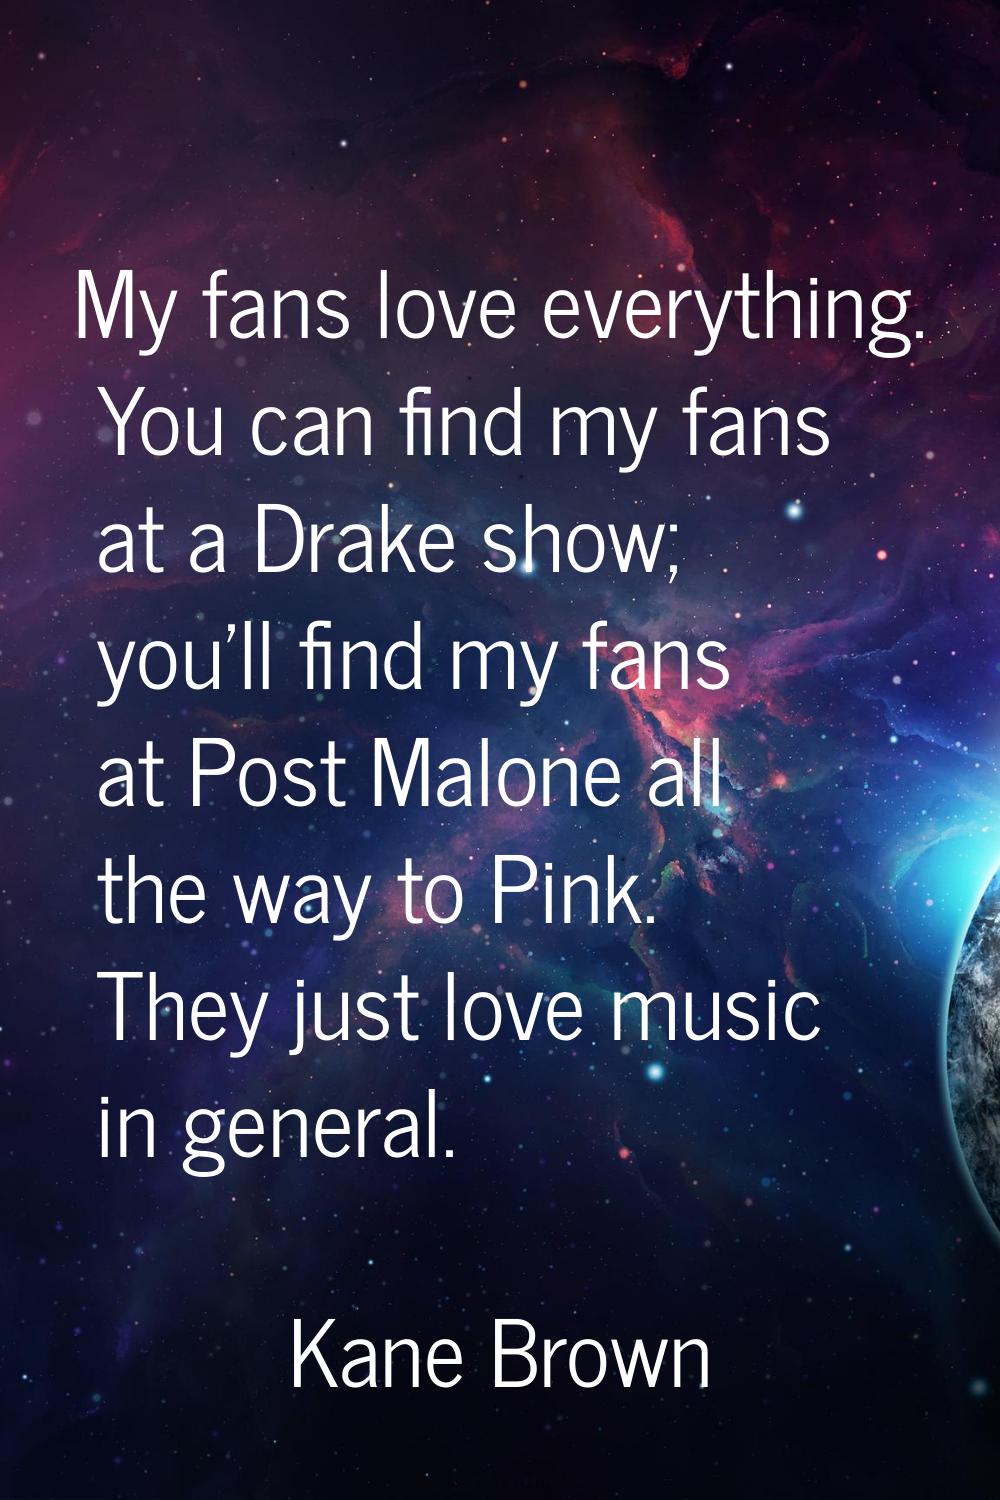 My fans love everything. You can find my fans at a Drake show; you'll find my fans at Post Malone a